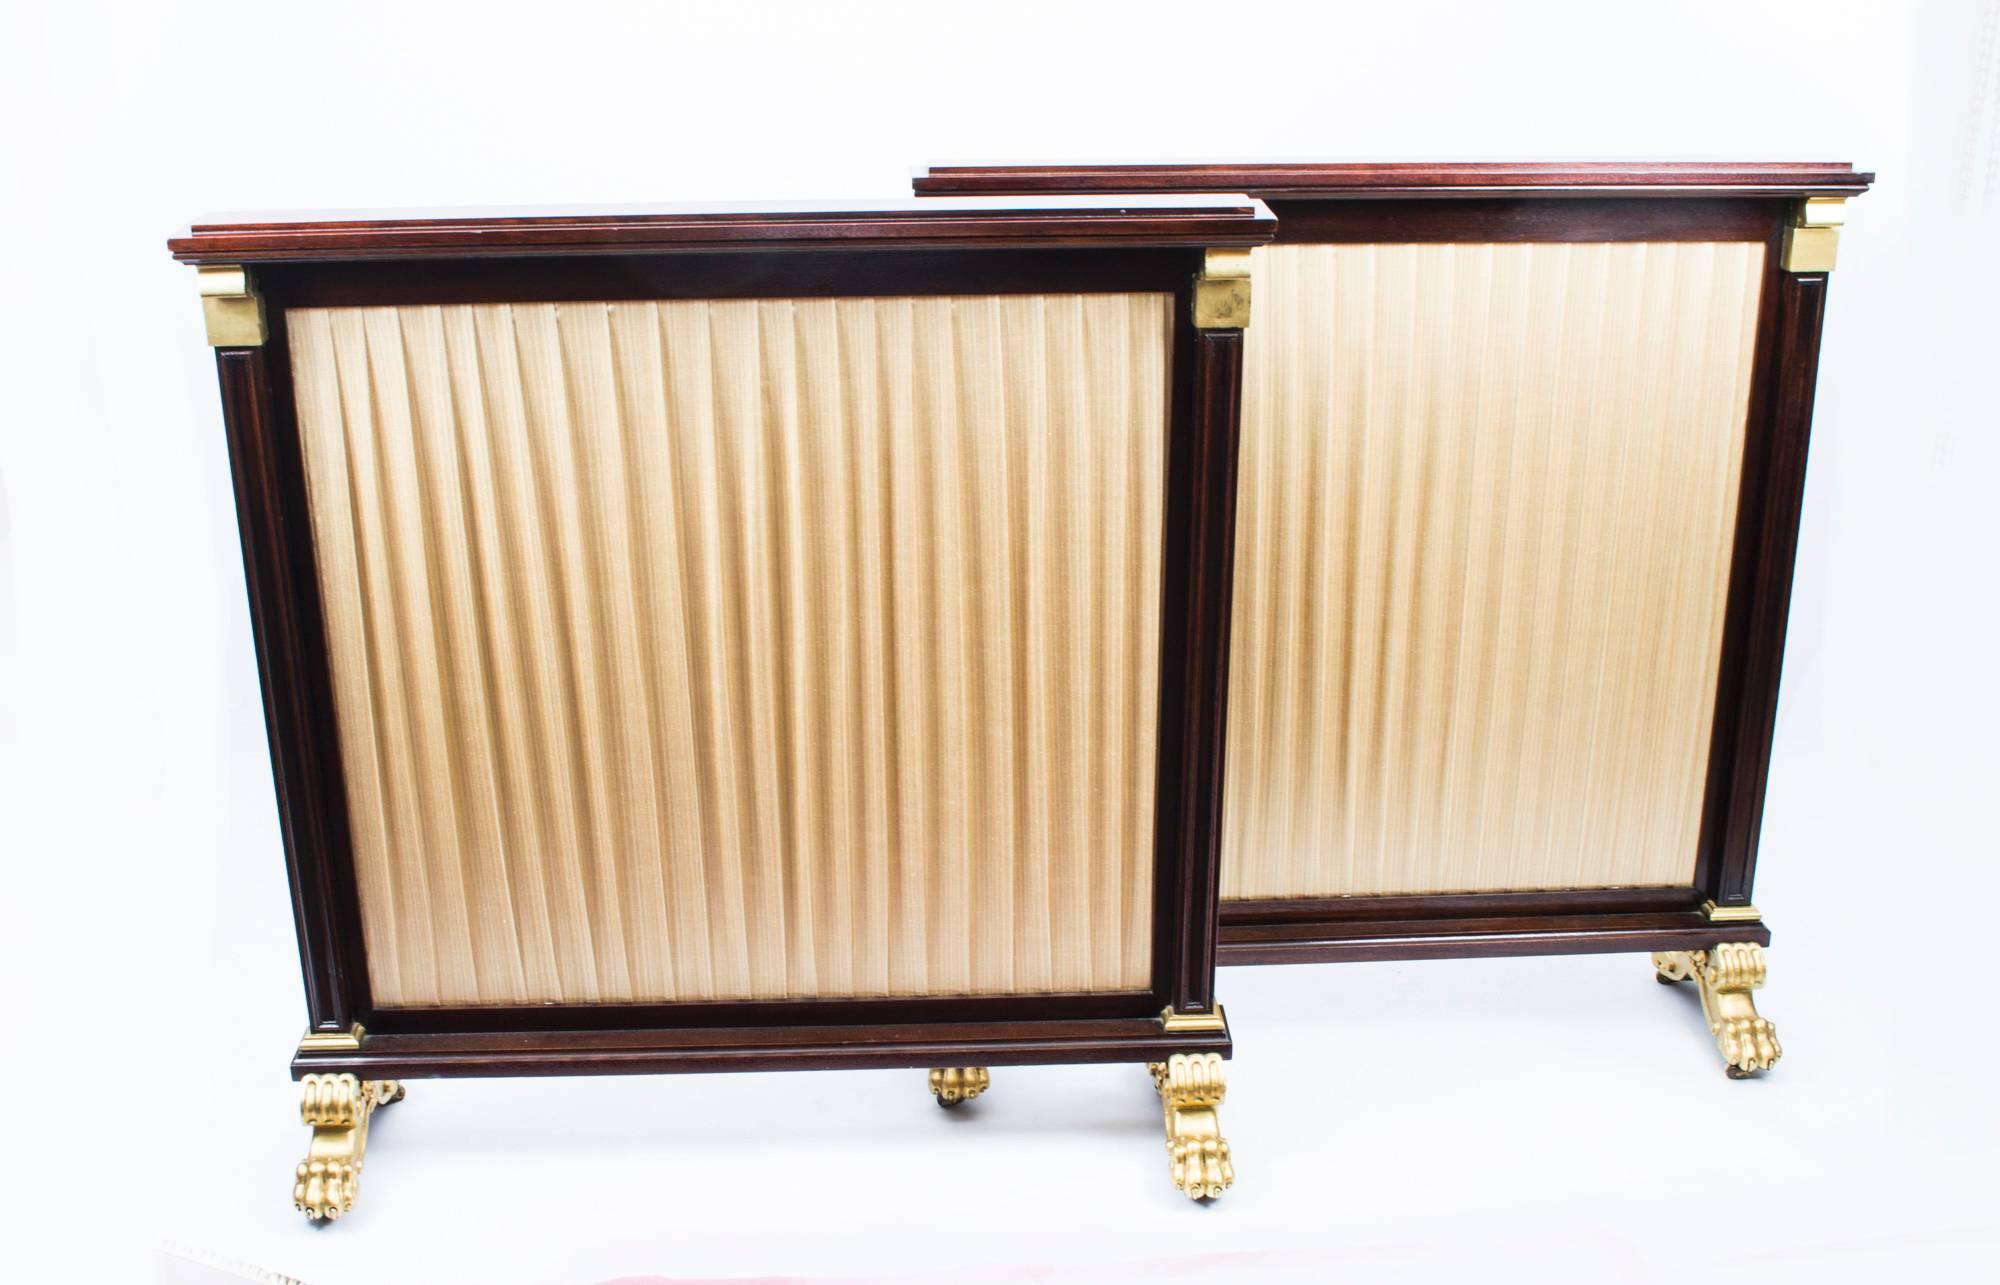 An elegant pair of William IV mahogany and gilded fire screens, circa 1835 in date.

Each features a pleated golden silk covered panel with mahogany back. They are each raised on a pair of twin gilded lion's paw feet, with gilded shell mounts. The